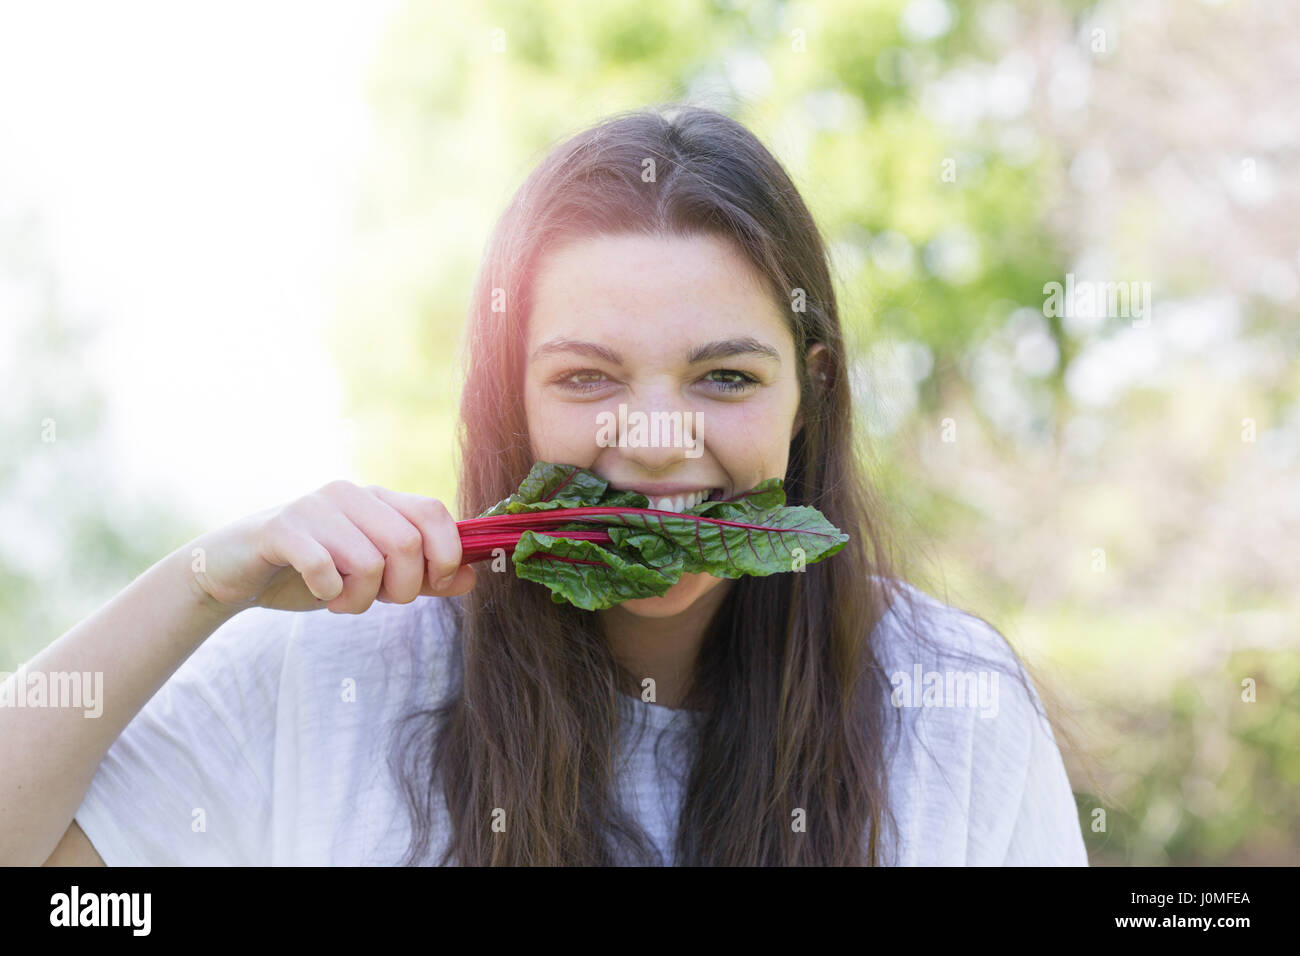 Young woman eating leaf vegetable Stock Photo